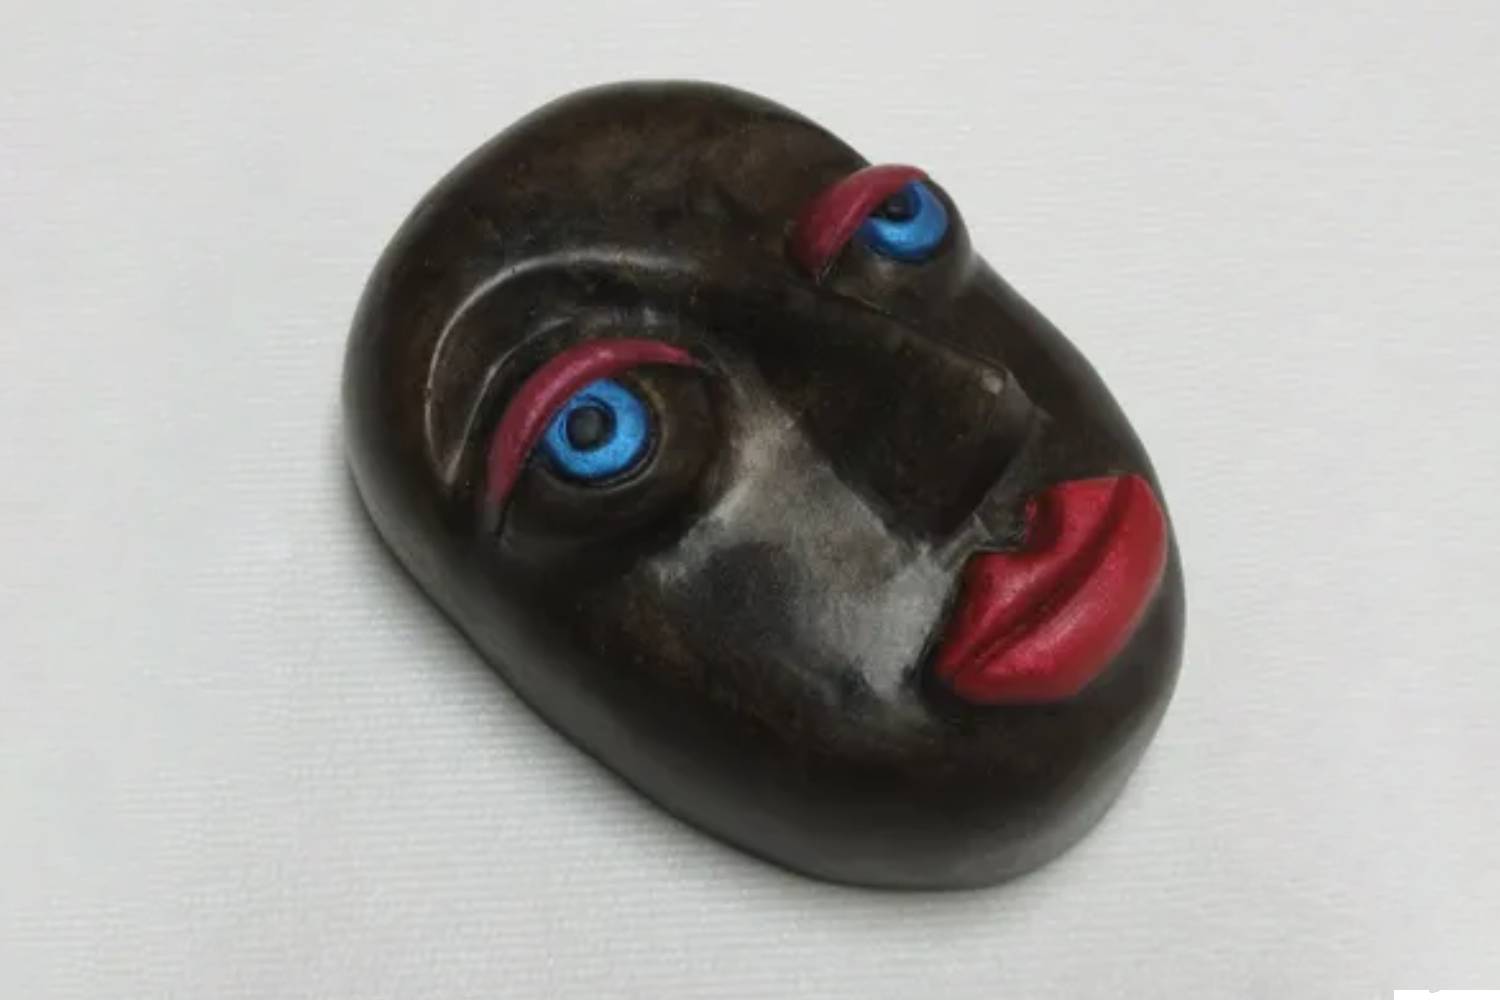 A black face with blue eyes and red lips.